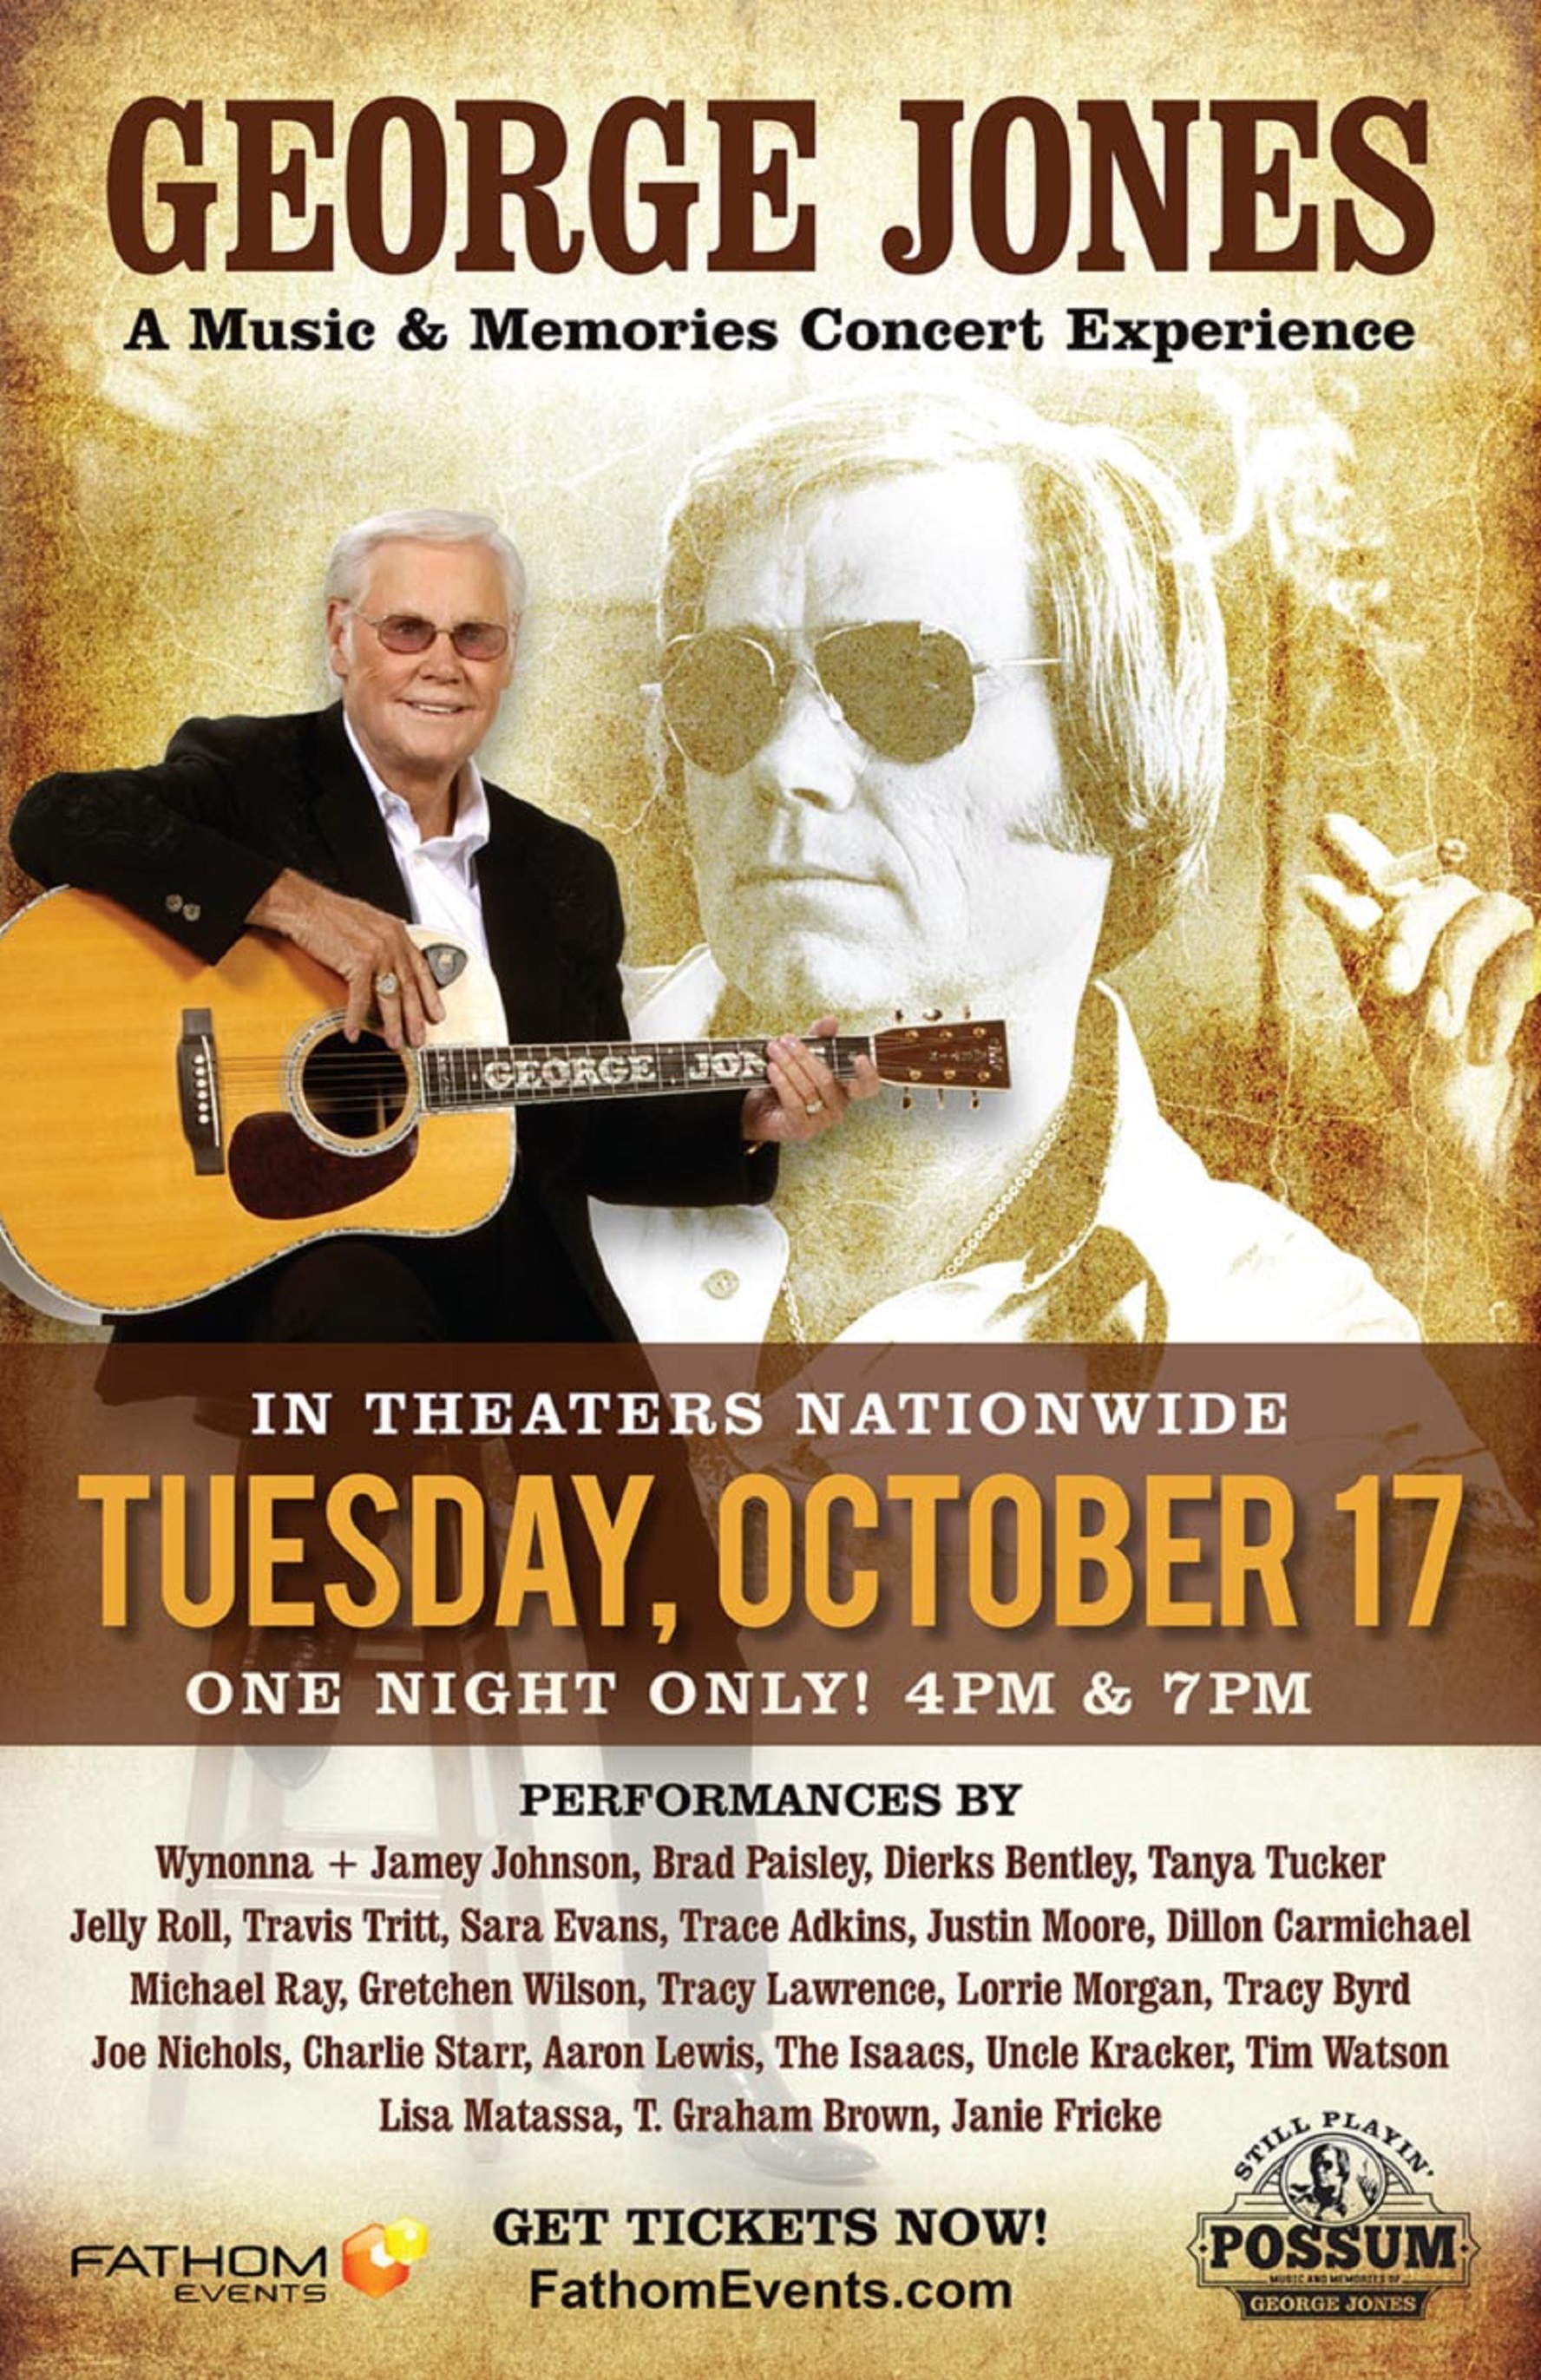 'STILL PLAYIN' POSSUM' – A STAR-STUDDED TRIBUTE TO THE MUSIC OF GEORGE JONES HITS THEATERS NATIONWIDE FOR ONE NIGHT ONLY – OCTOBER 17